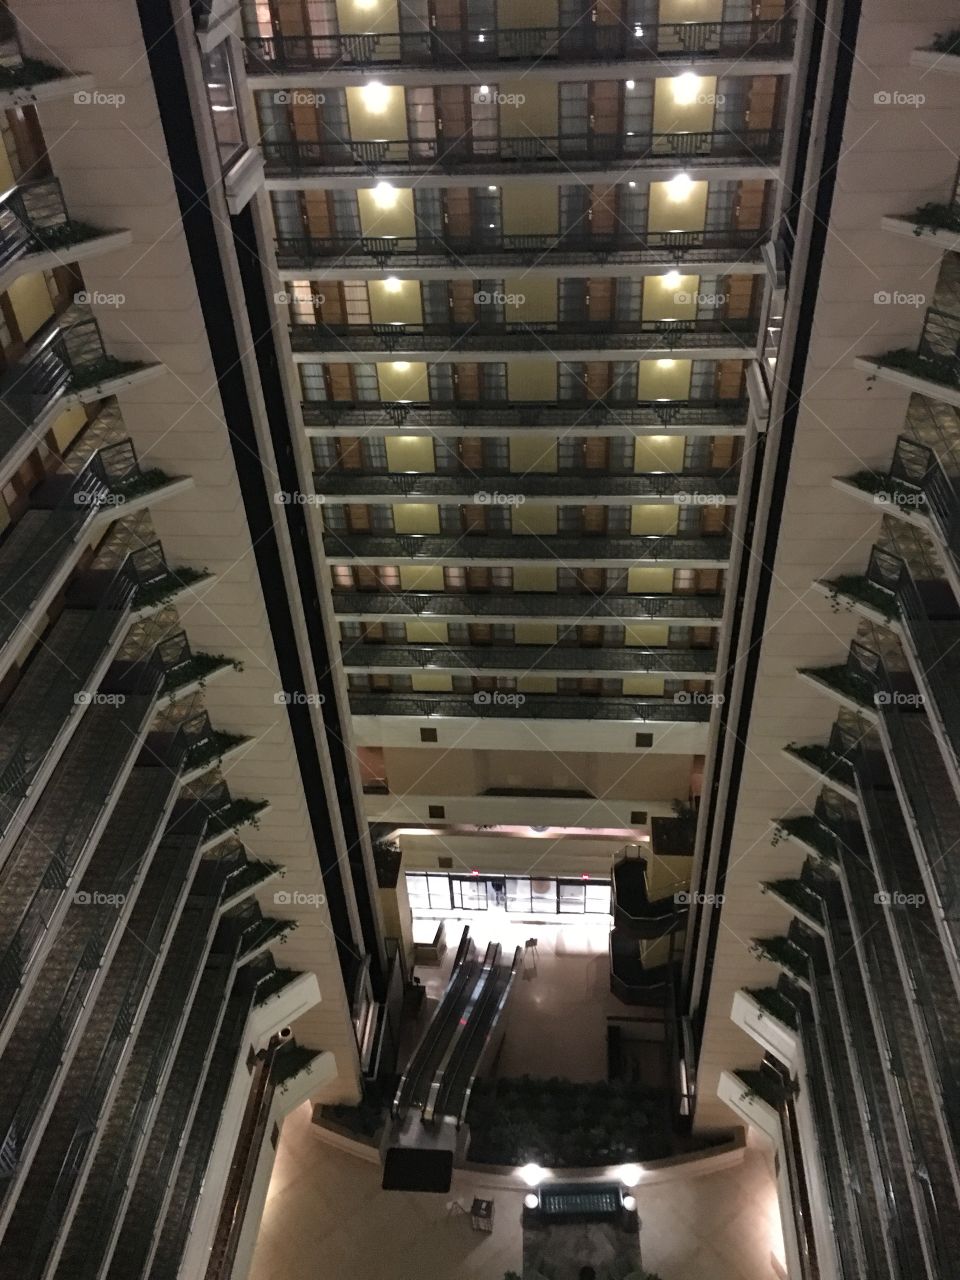 Way up high in a hotel! 